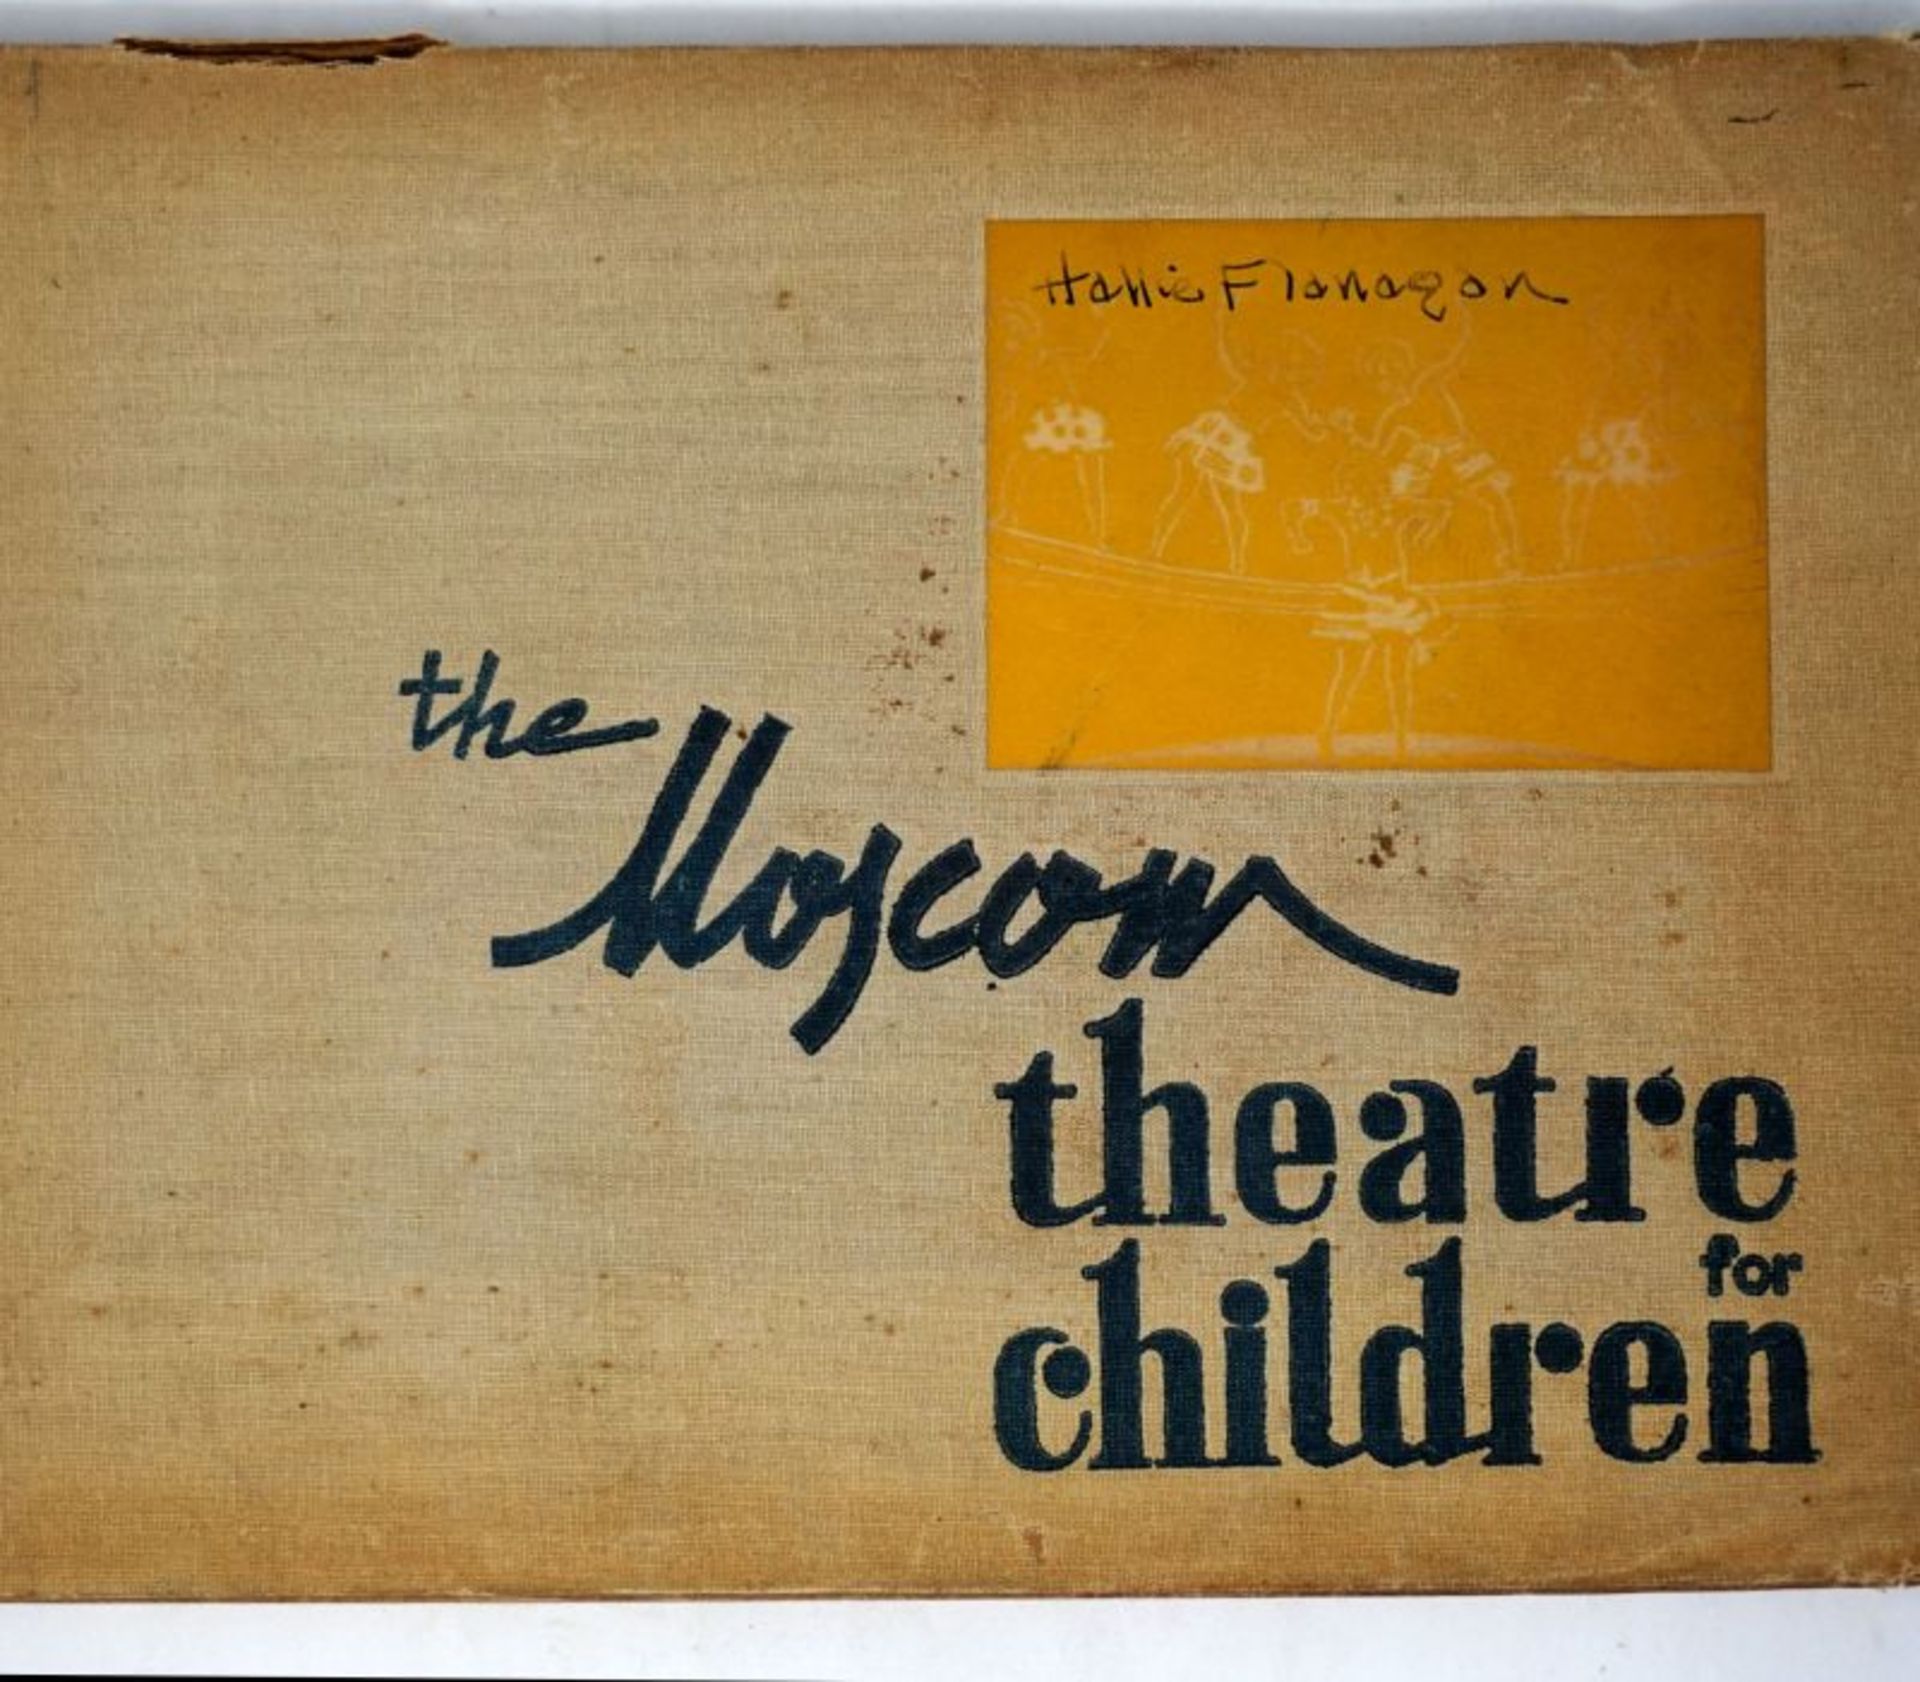 Moscow Theatre, The: for Children - Moskau 1934